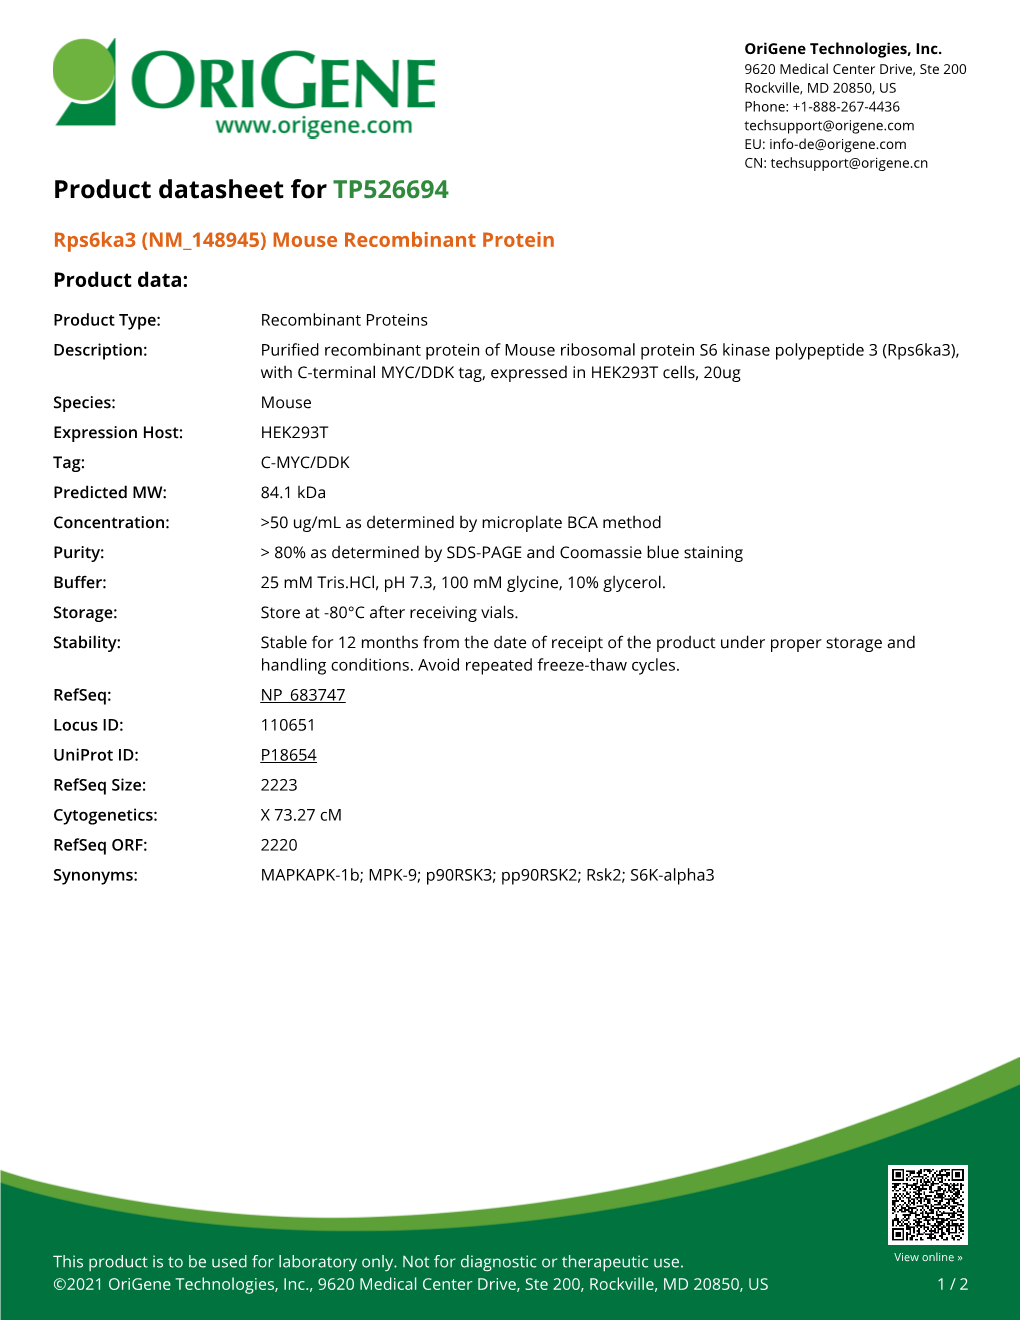 Rps6ka3 (NM 148945) Mouse Recombinant Protein Product Data